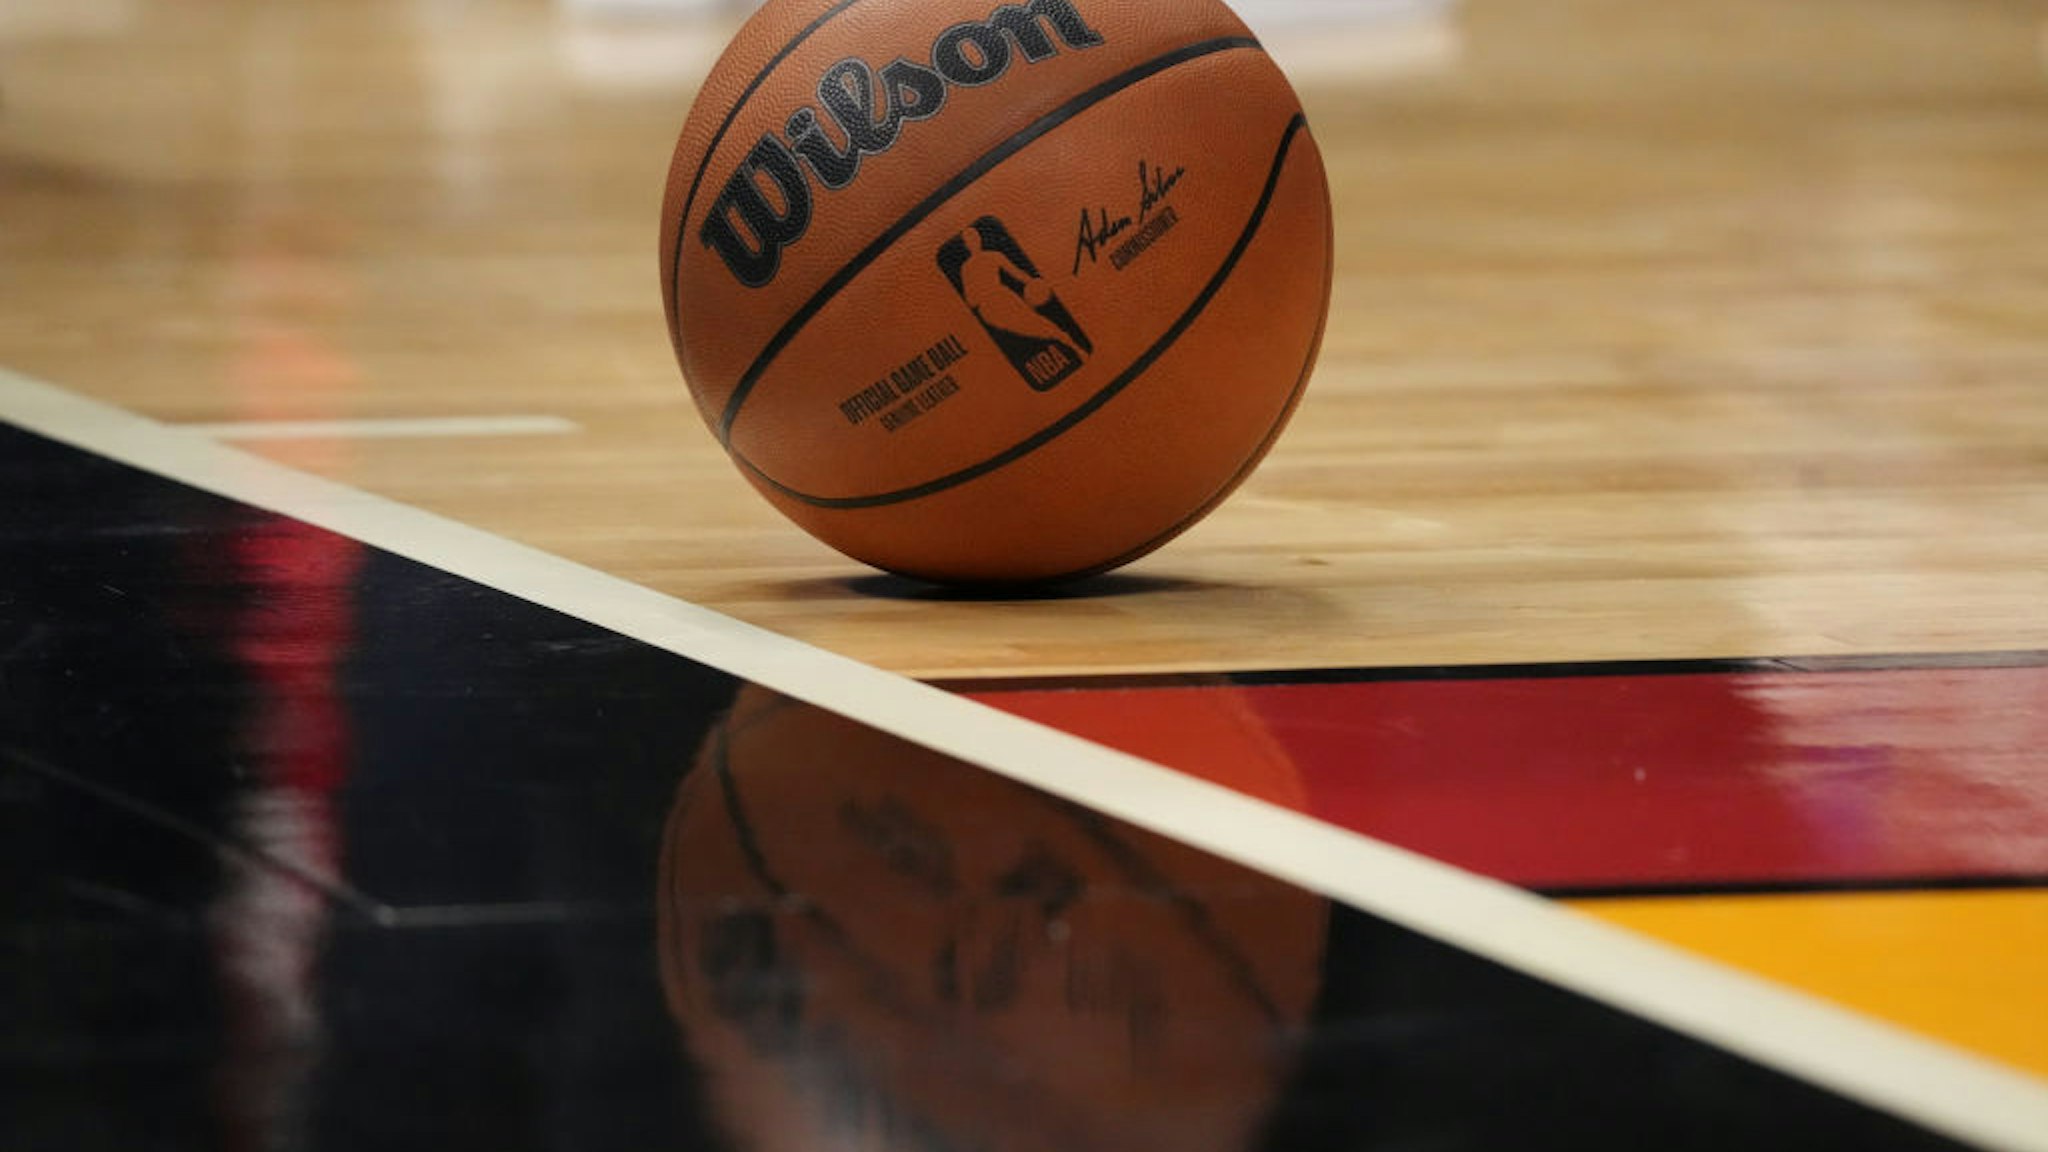 MIAMI, FLORIDA - NOVEMBER 29: A general view of the an official Wilson NBA basketball on the court during the game between the Miami Heat and the Denver Nuggets in the second half at FTX Arena on November 29, 2021 in Miami, Florida. NOTE TO USER: User expressly acknowledges and agrees that, by downloading and or using this photograph, User is consenting to the terms and conditions of the Getty Images License Agreement. (Photo by Mark Brown/Getty Images)